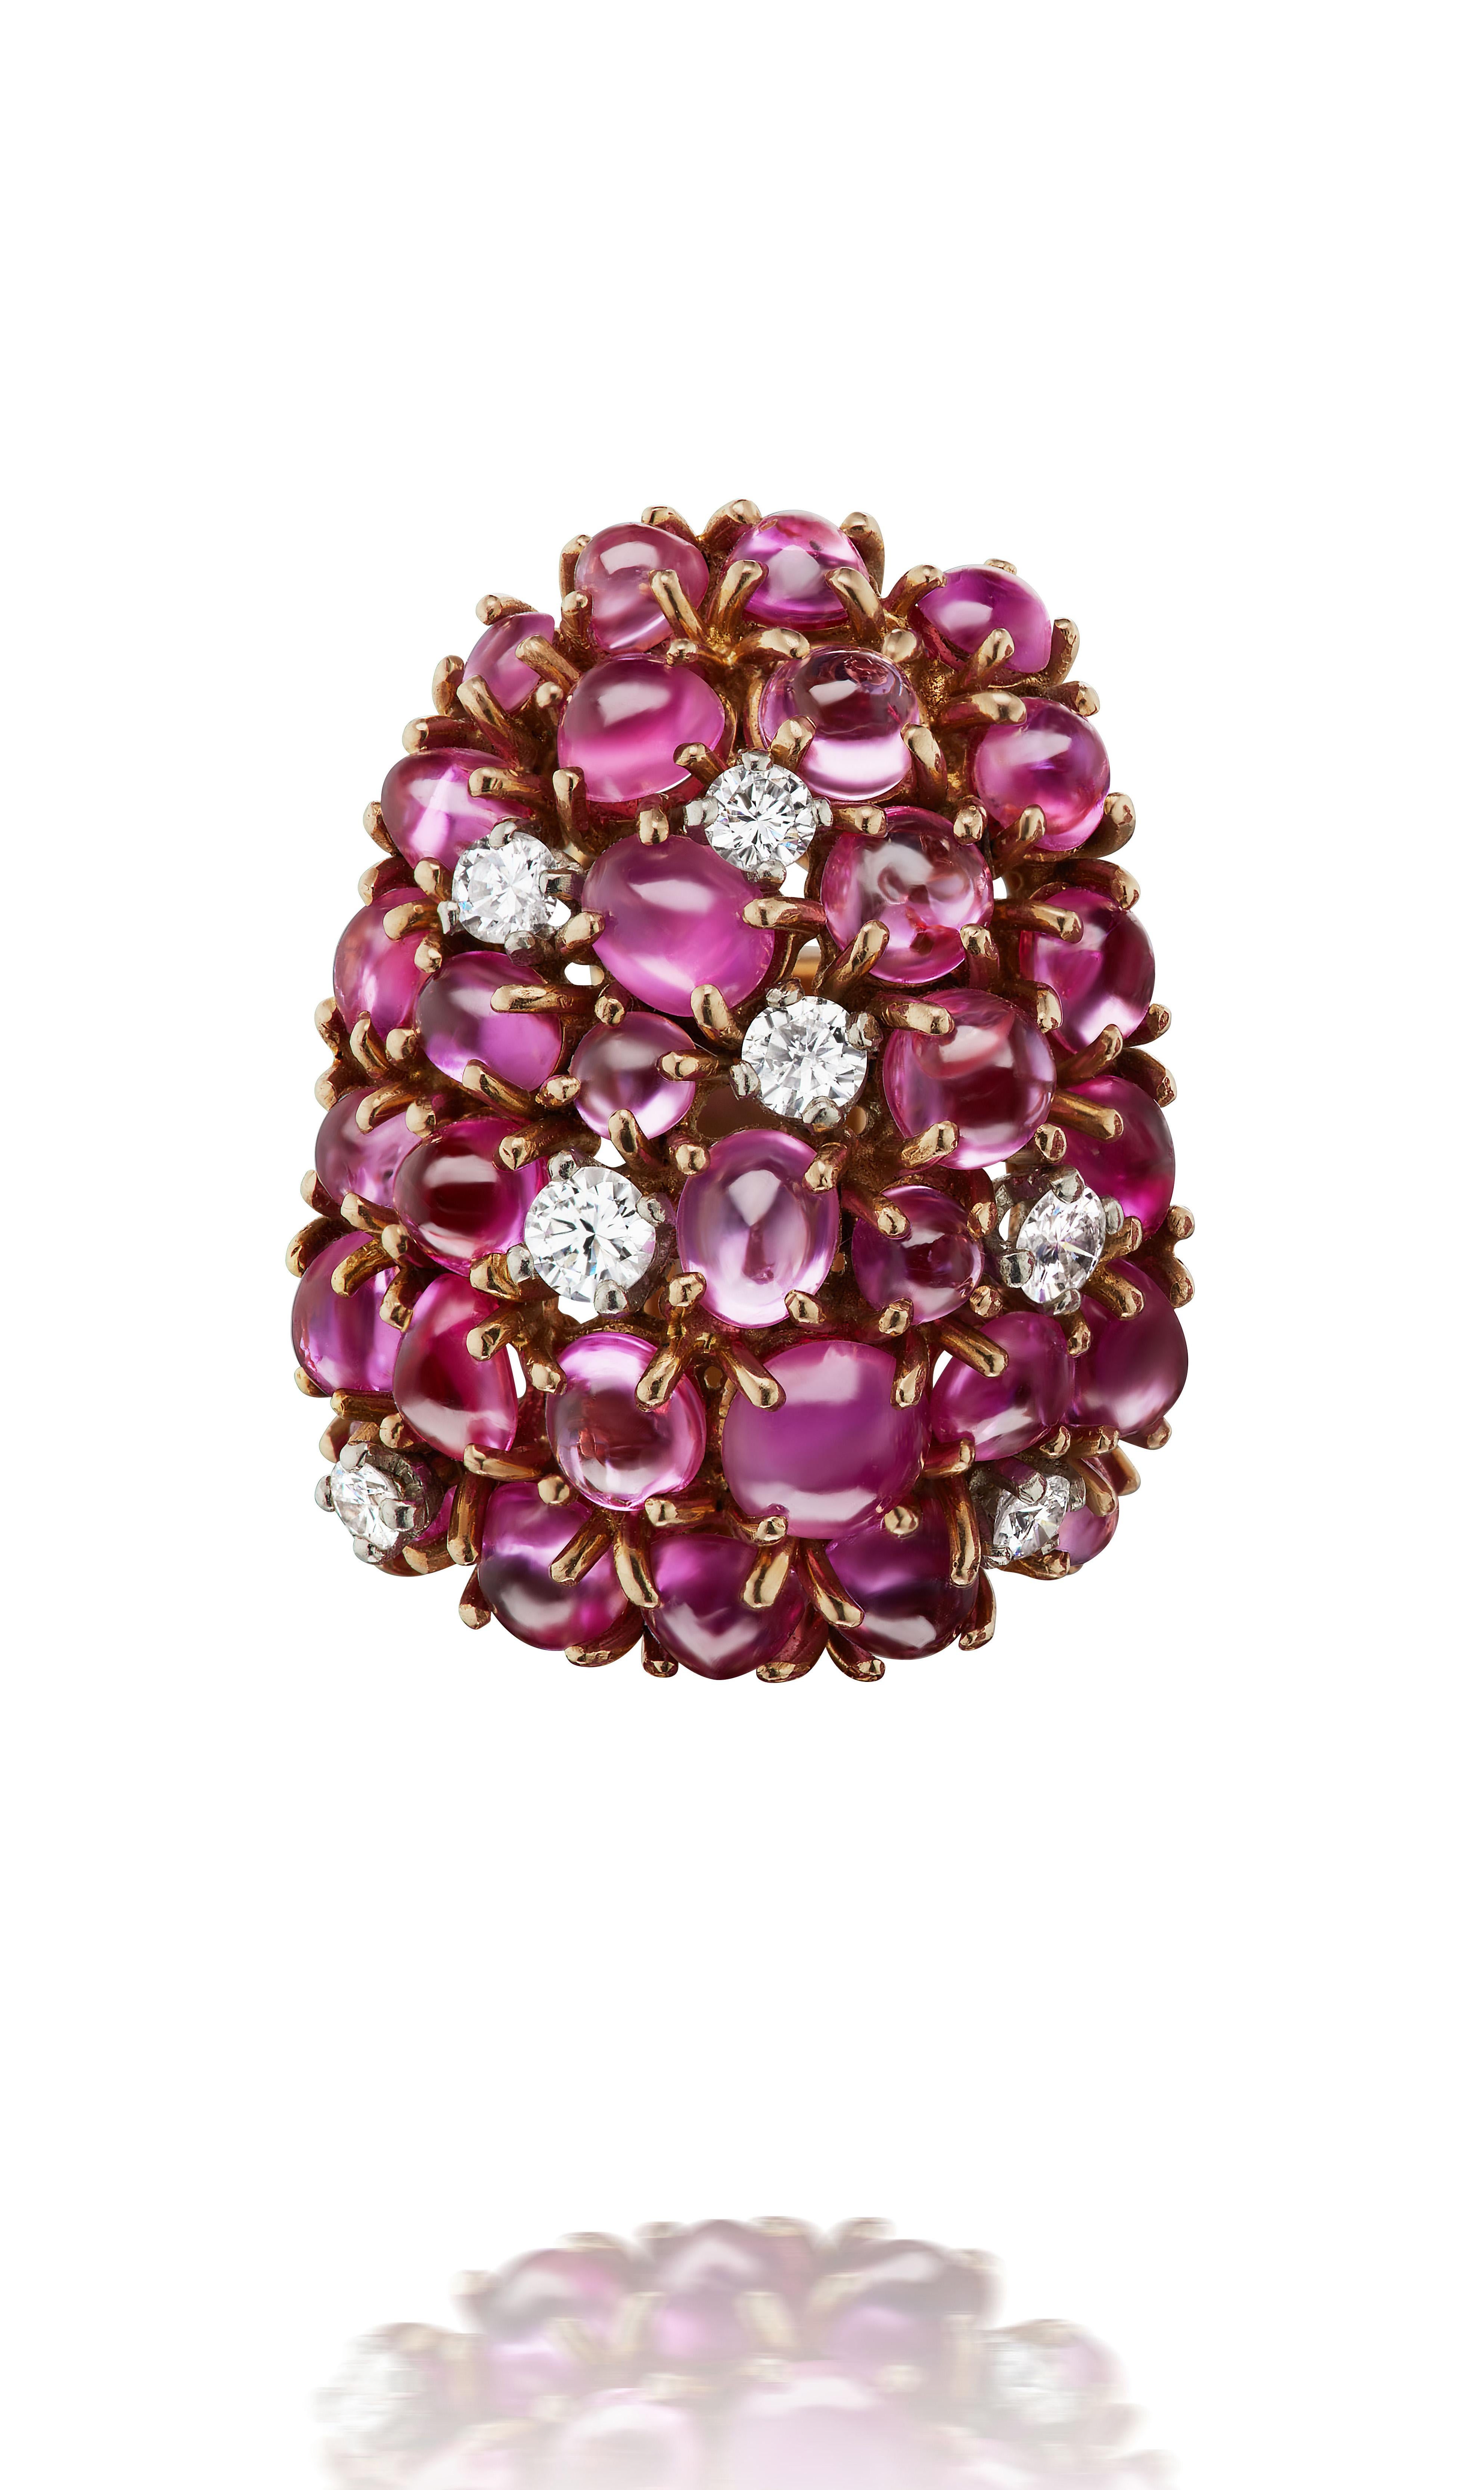 These playful and charming earclips made in France circa 1960 consist of 58 cabochon pink rubies weighing approximately 11.60 carats and 14 round brilliant diamonds weighing approximately .70 carats. 

An excellent splash of color for everyday or